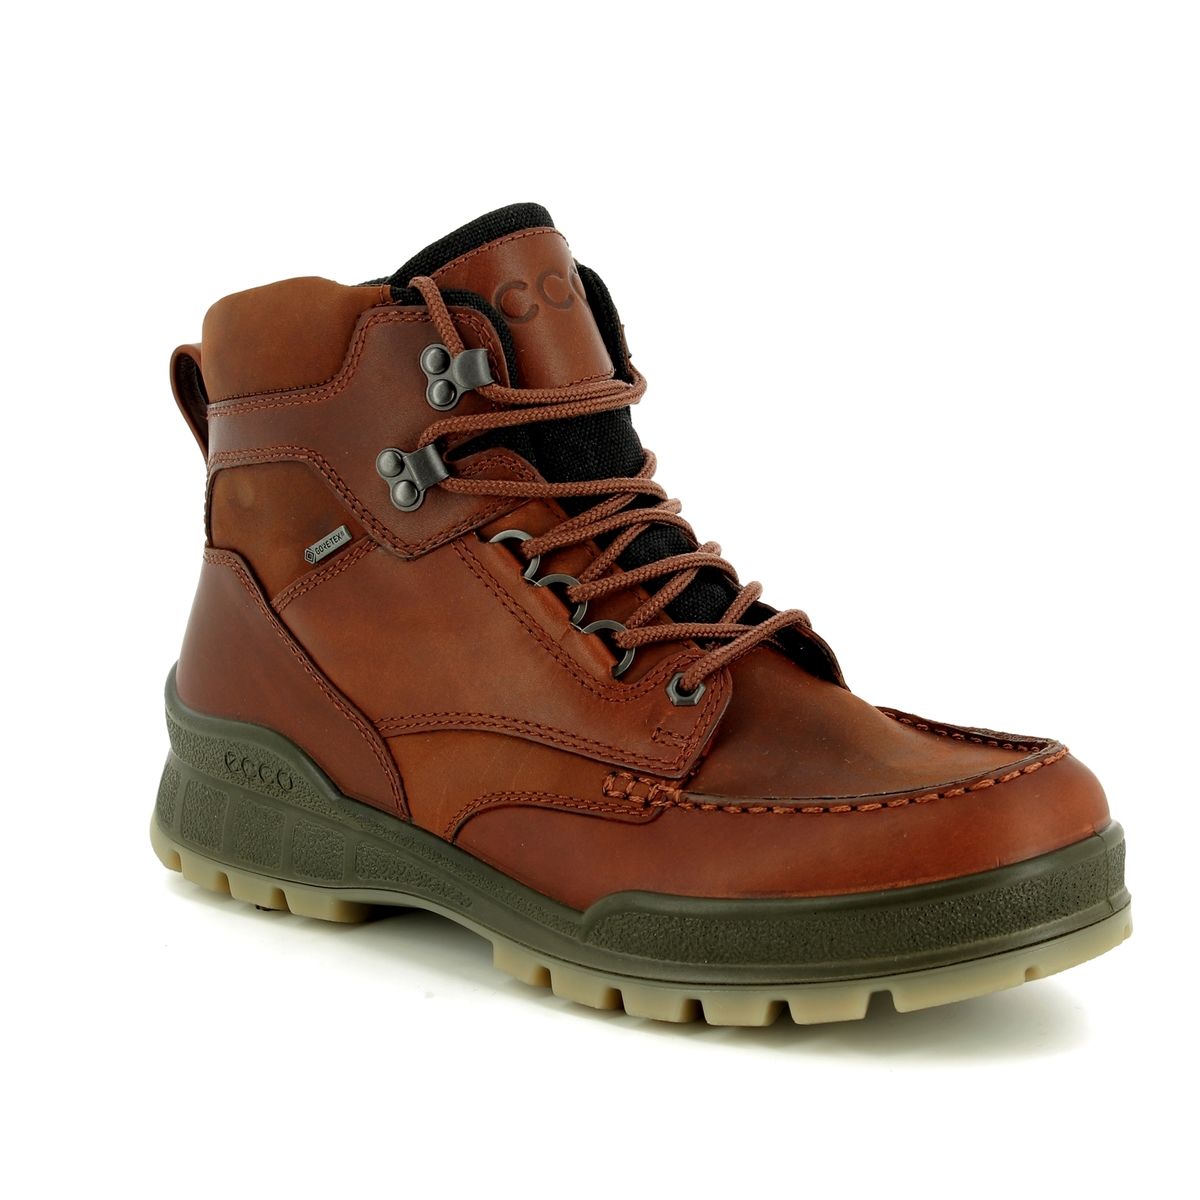 Ecco Track 25 Boot Gore-Tex Brown Multi Mens Outdoor Walking Boots 831704-52699 In Size 44 In Plain Brown Multi